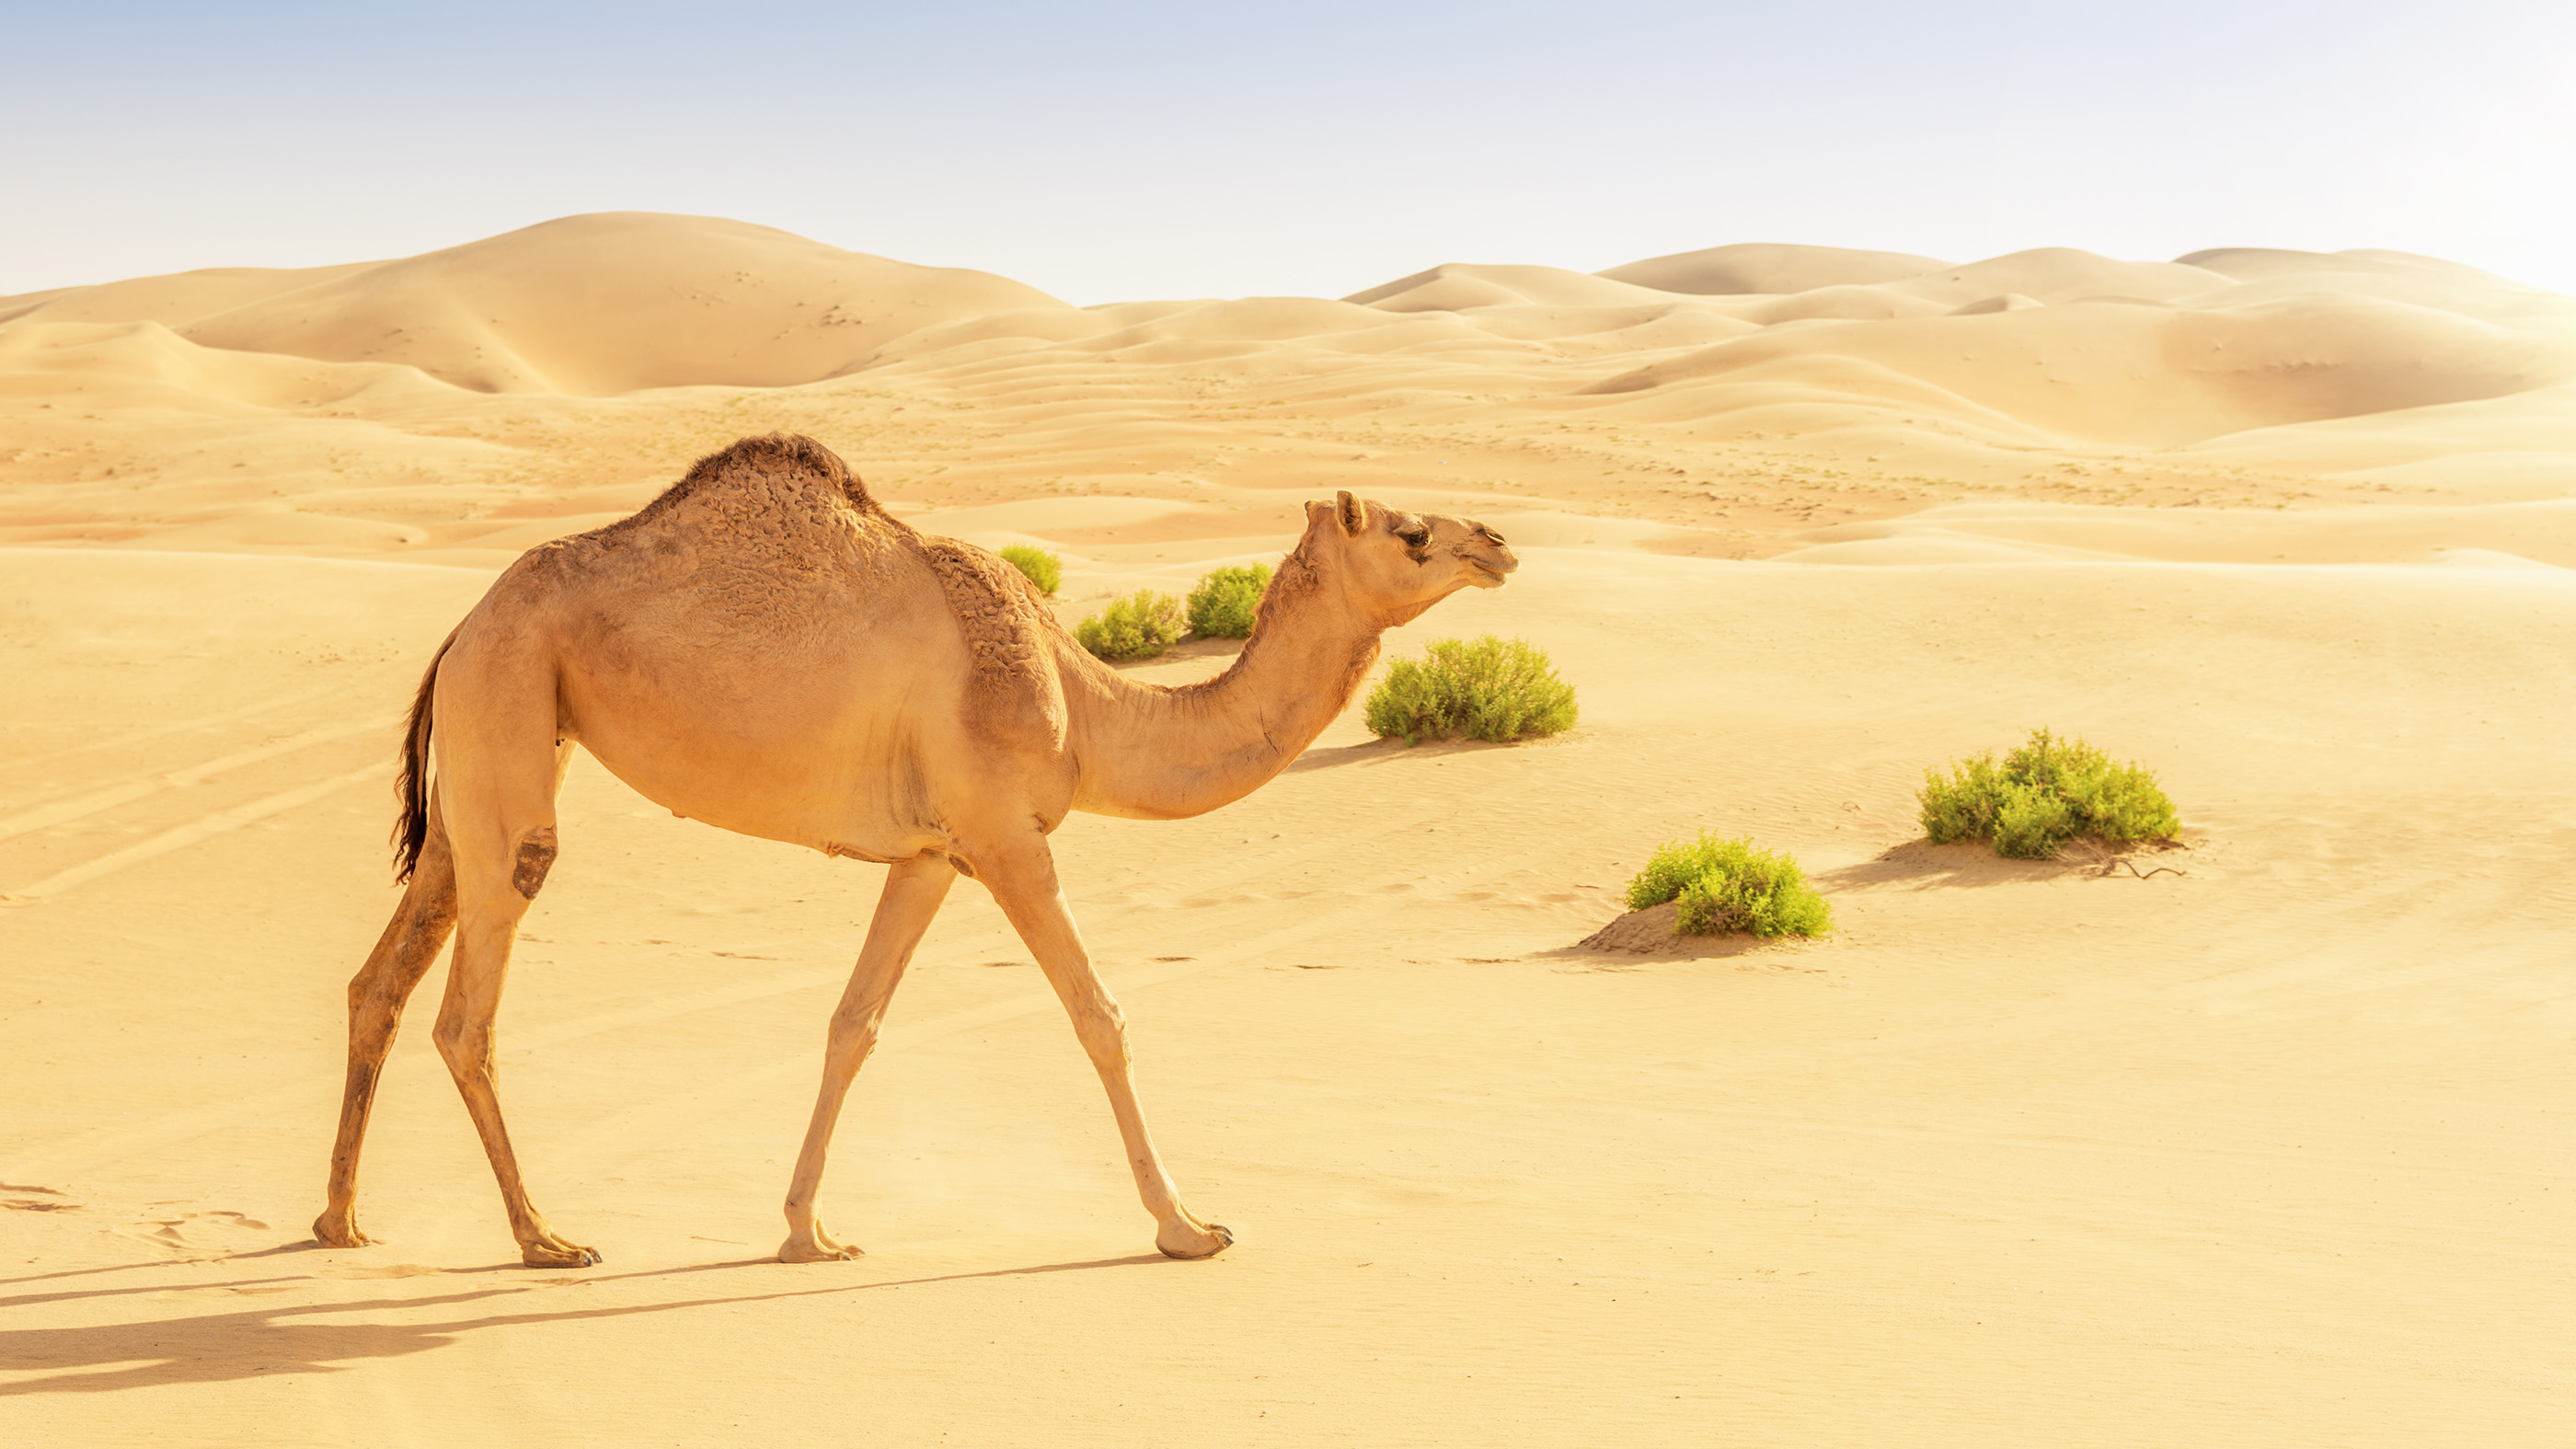 What do camels eat in the desert? | Live Science